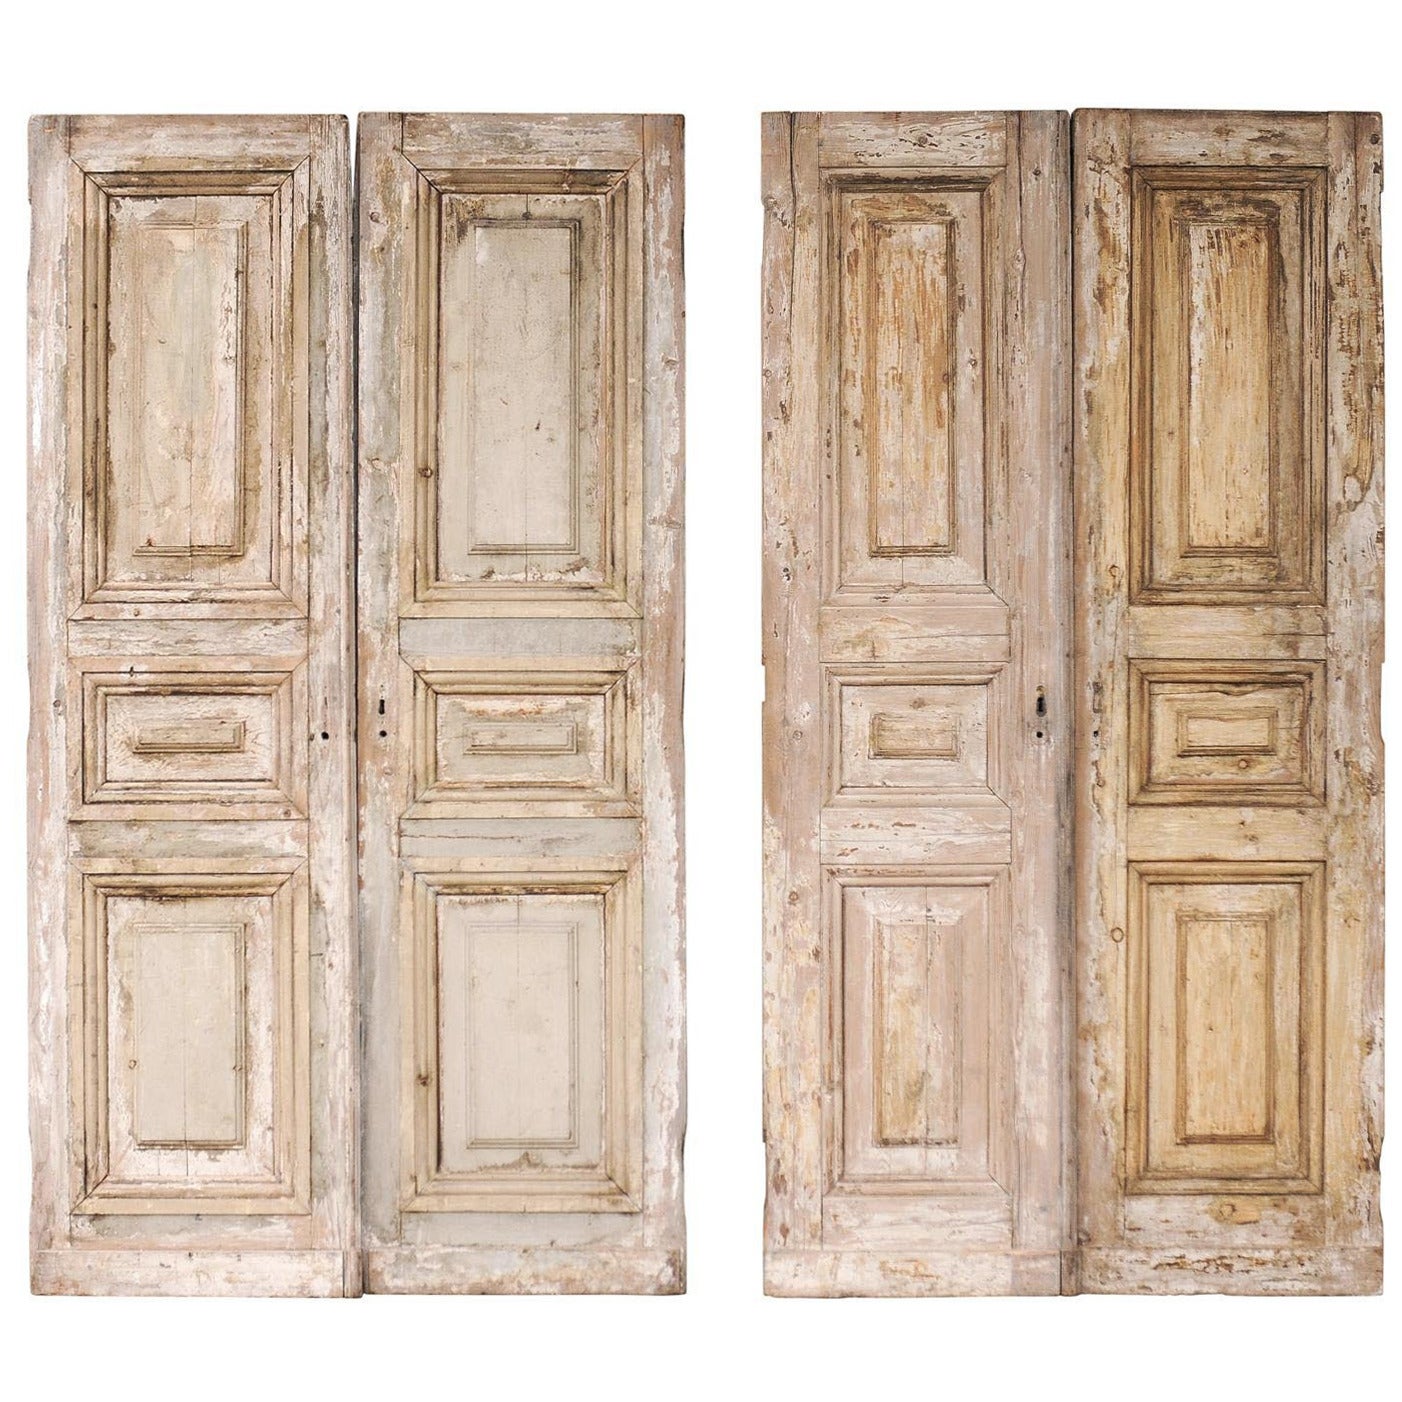 A Pair of French 19th Century Wooden Doors